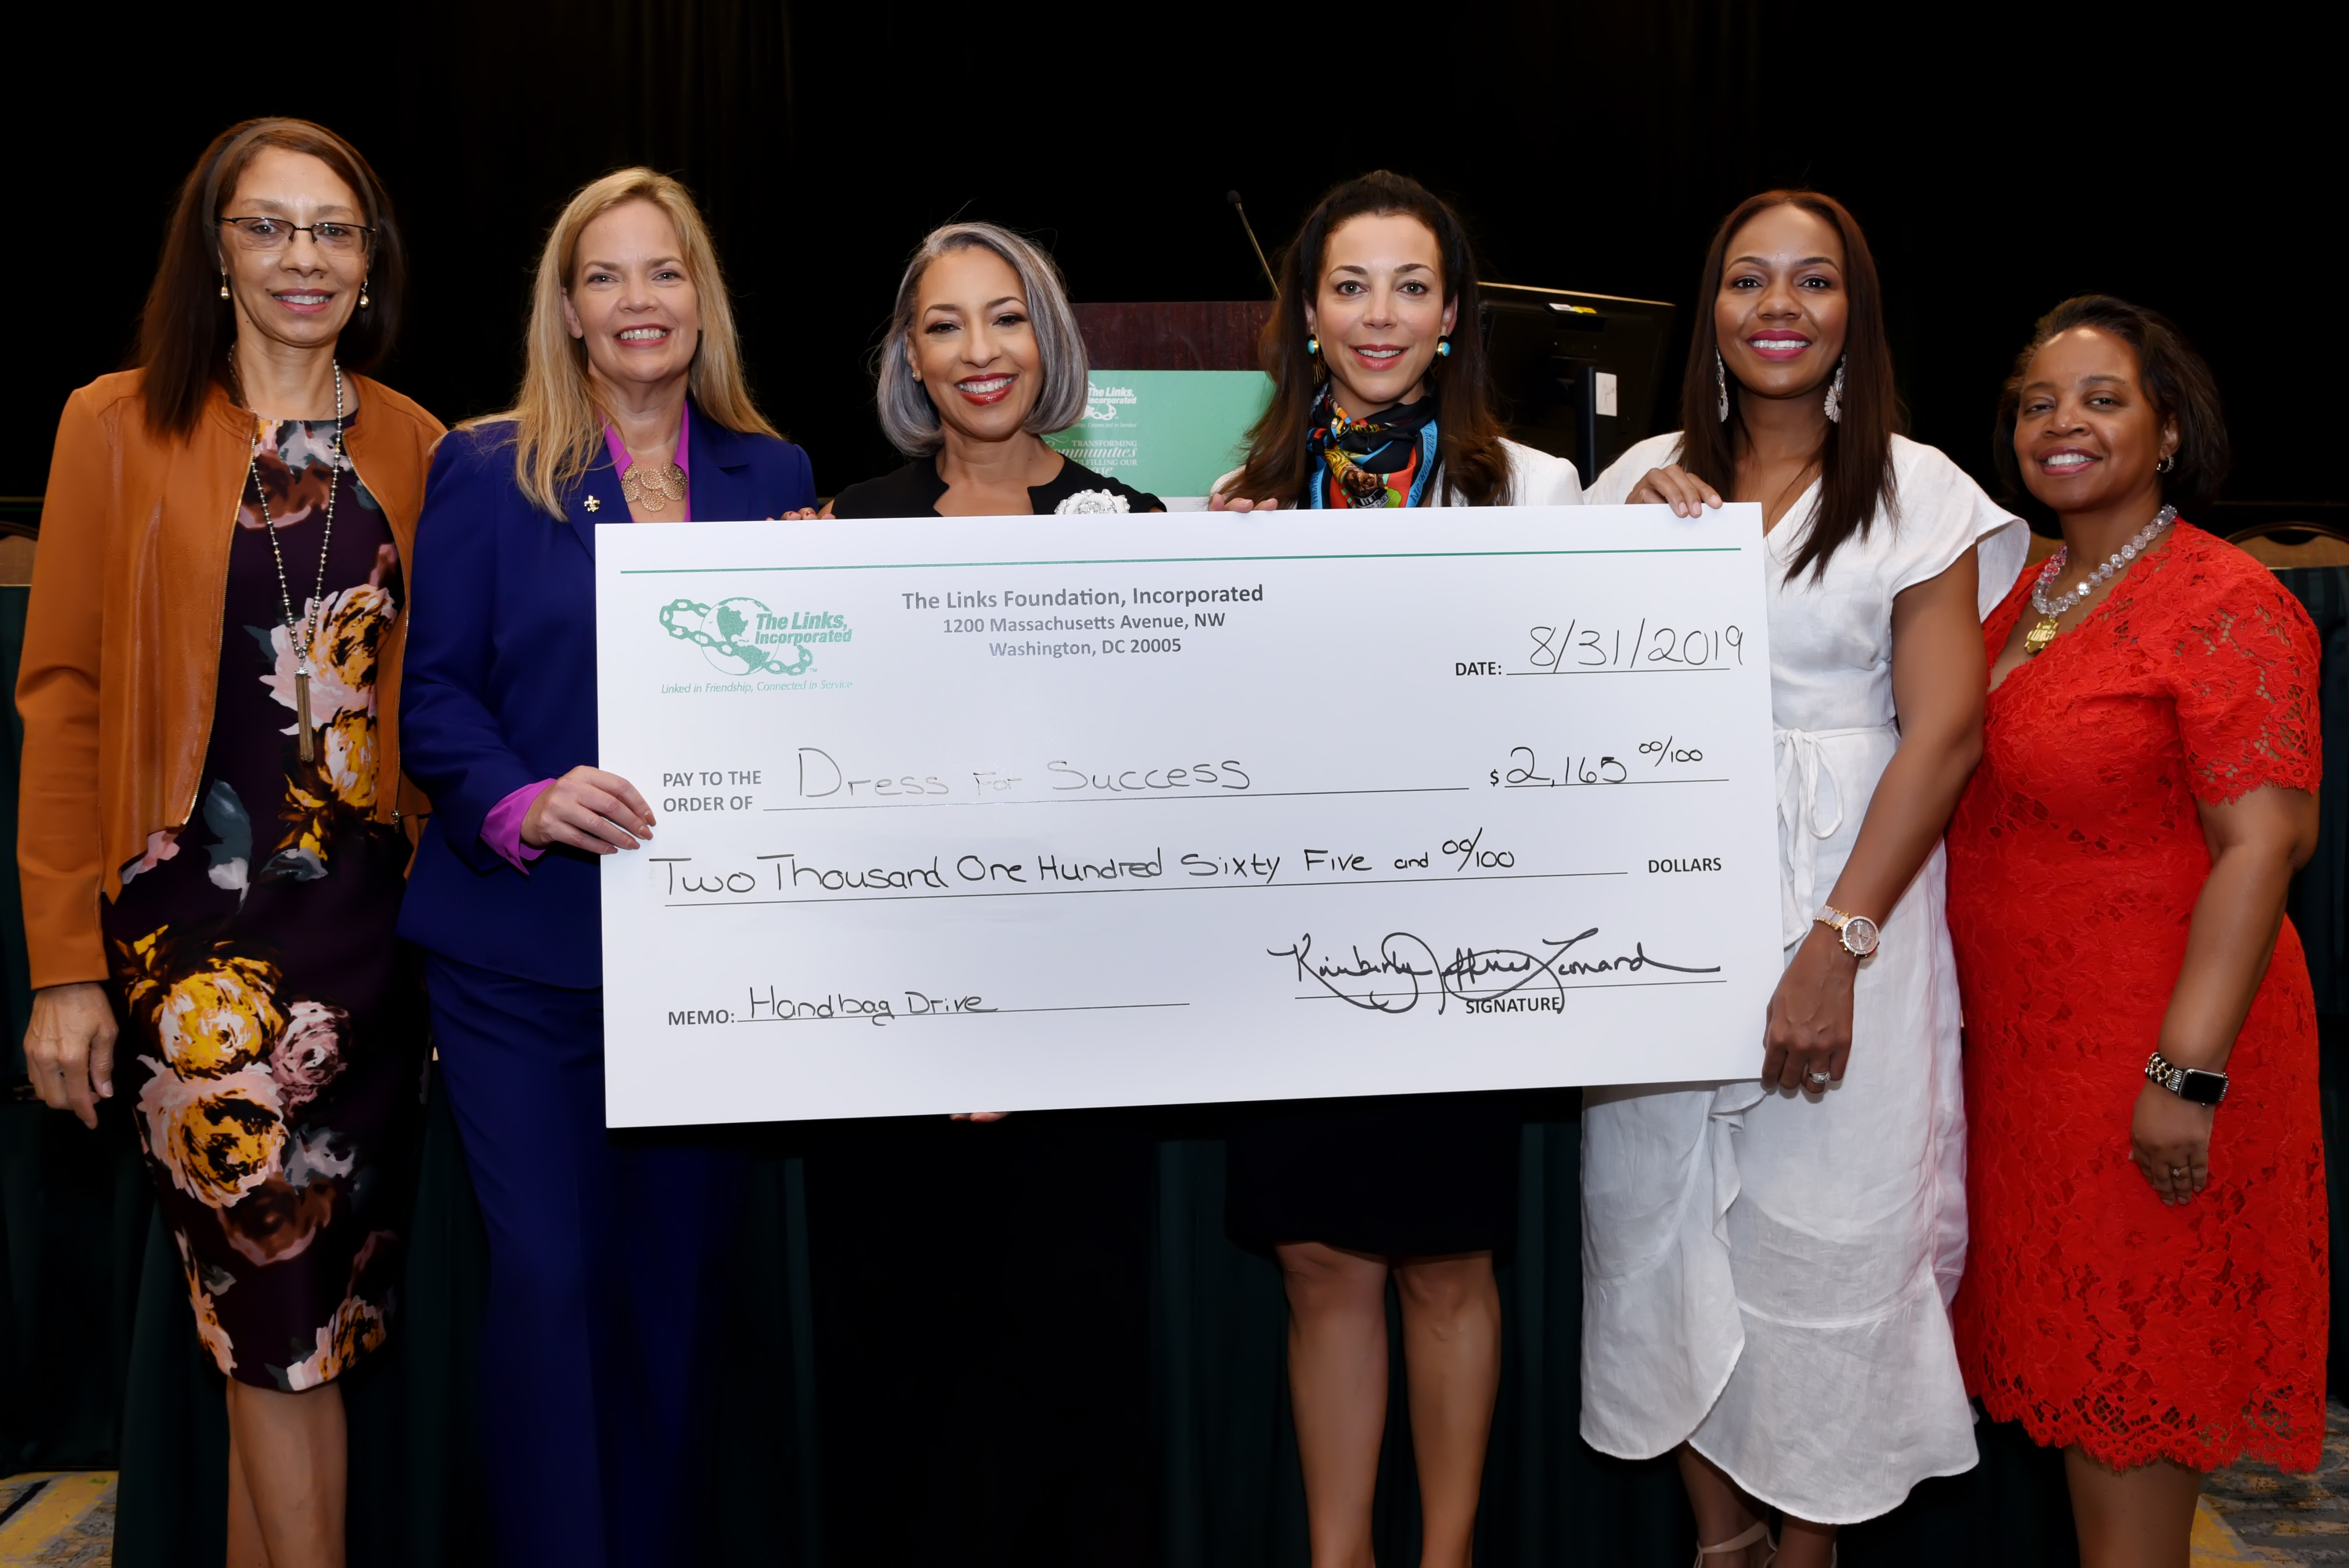 The Links Foundation, Incorporated Commits Funds and Supplies to Dress for Success New Orleans to Help Empower Local Women